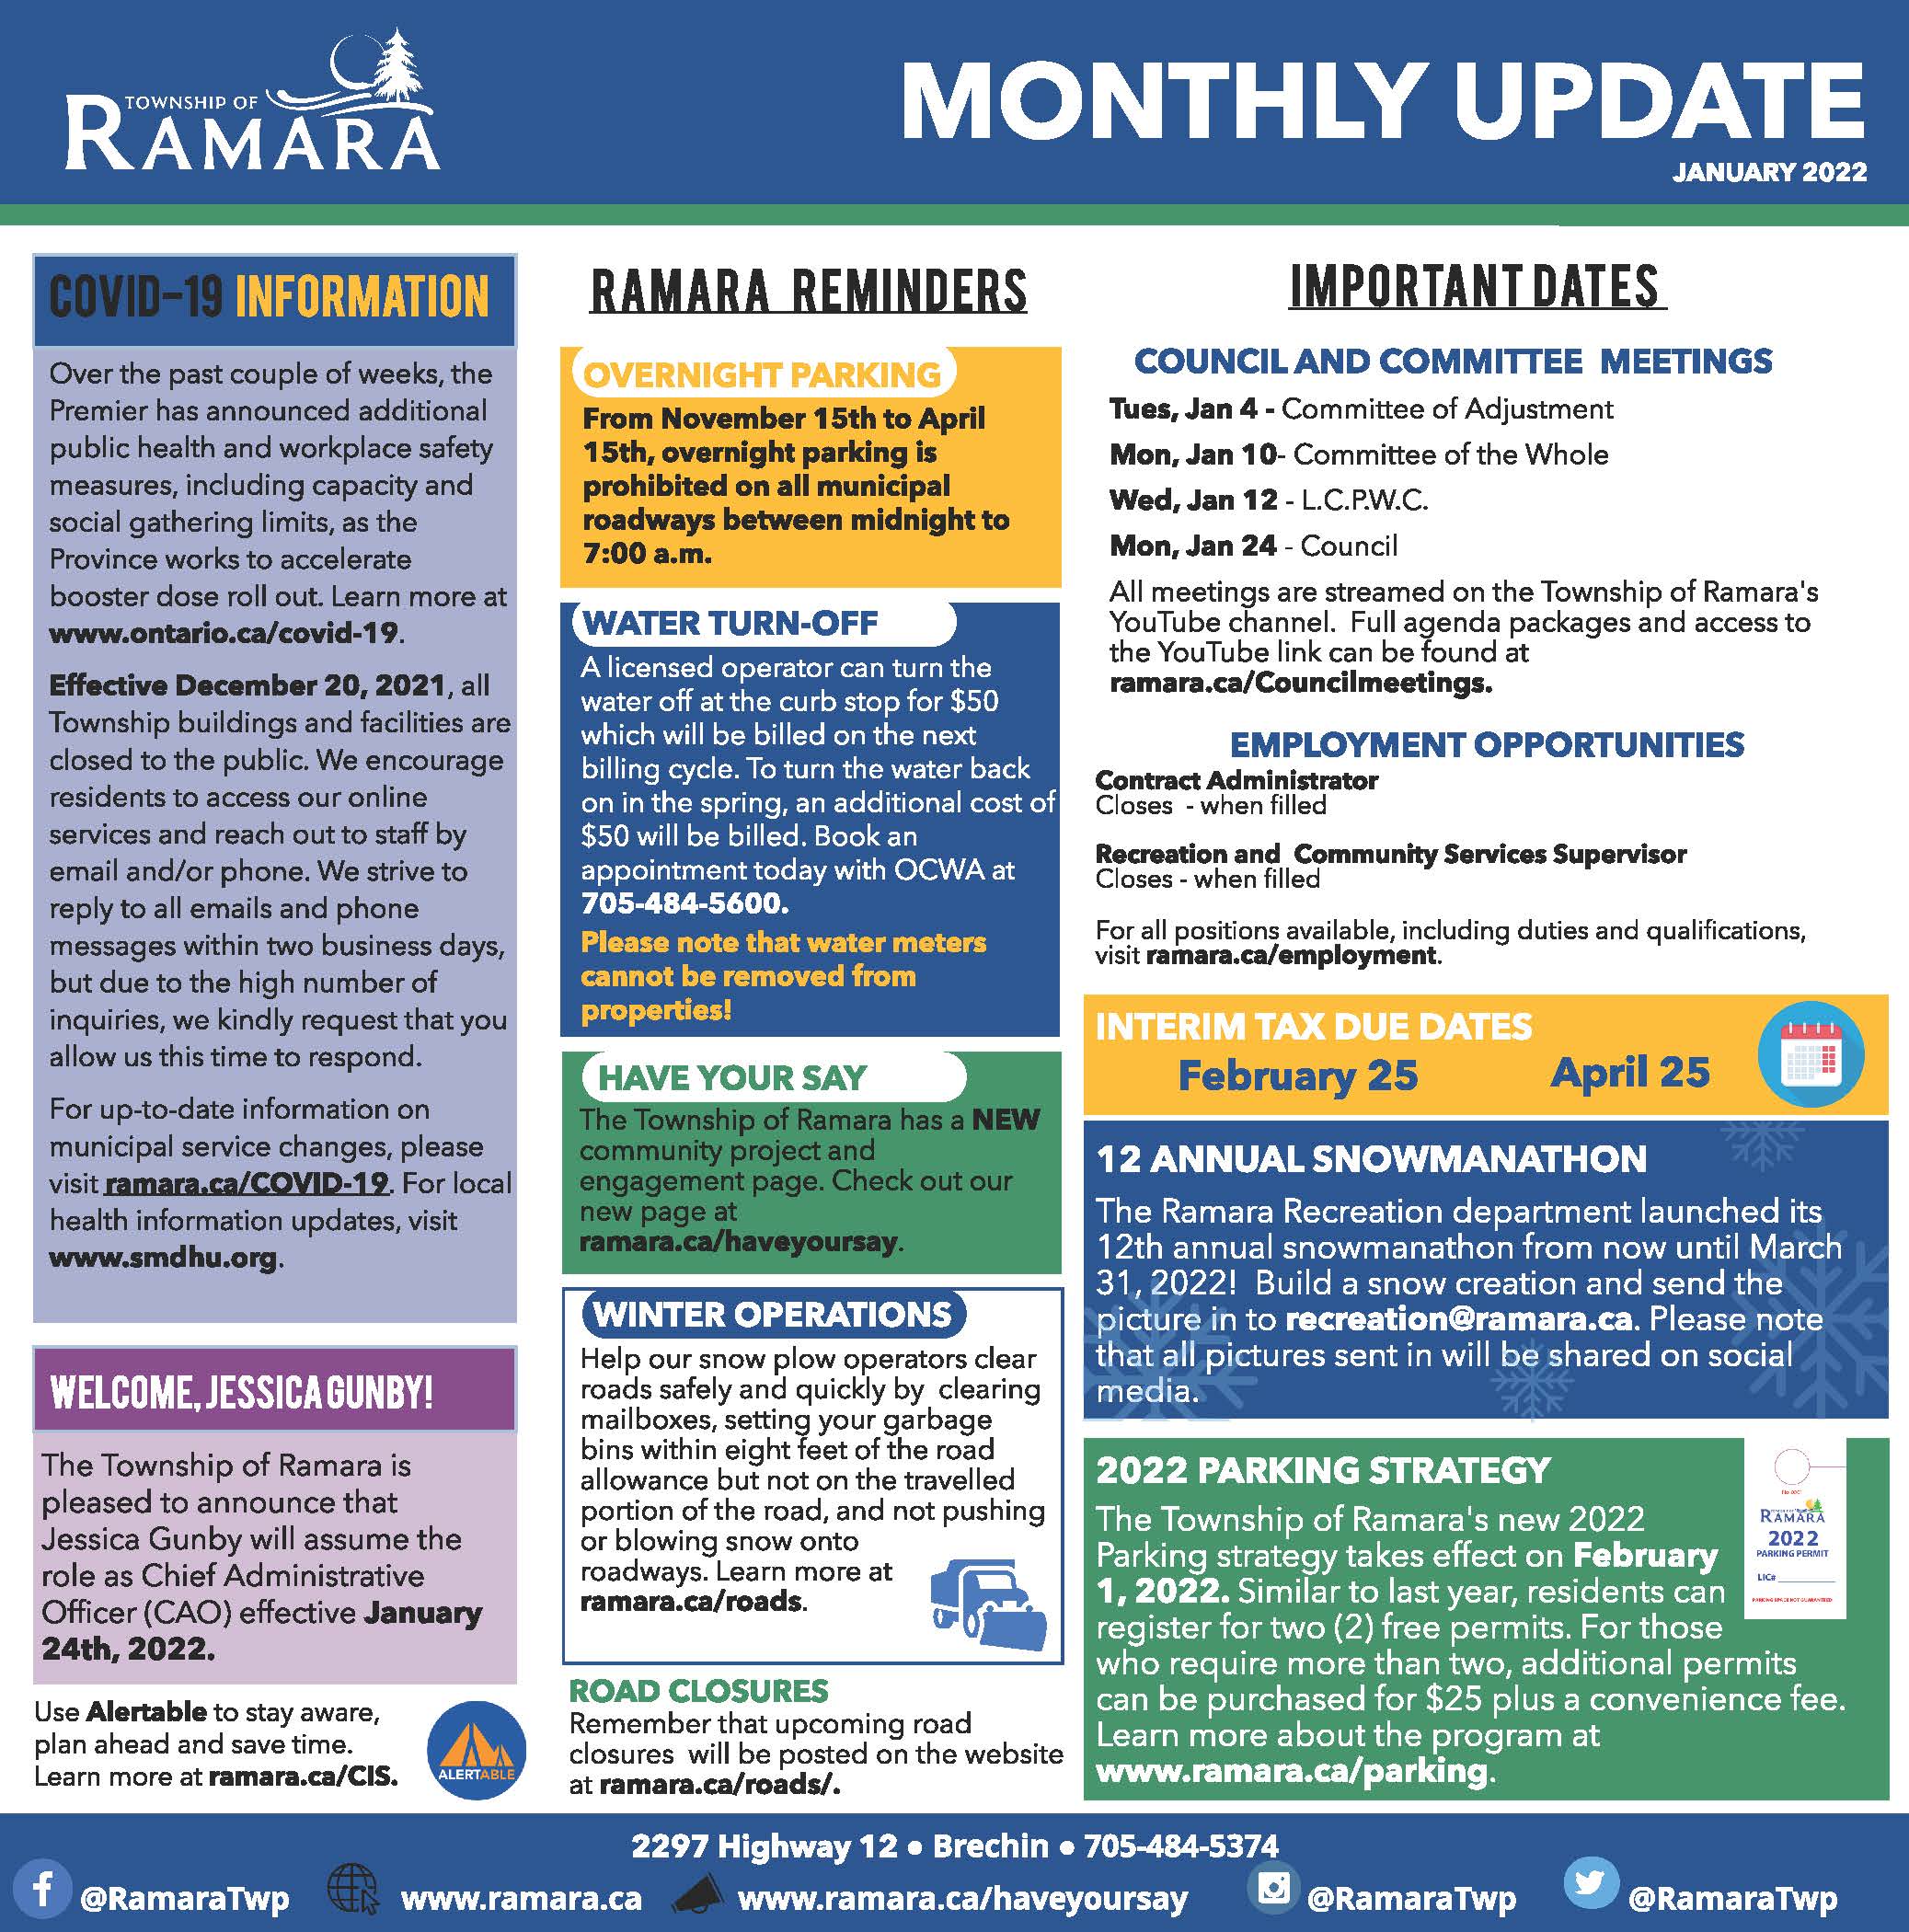 January edition of the Ramara Bulletin that lists all the news and important updates for Ramara Township. 